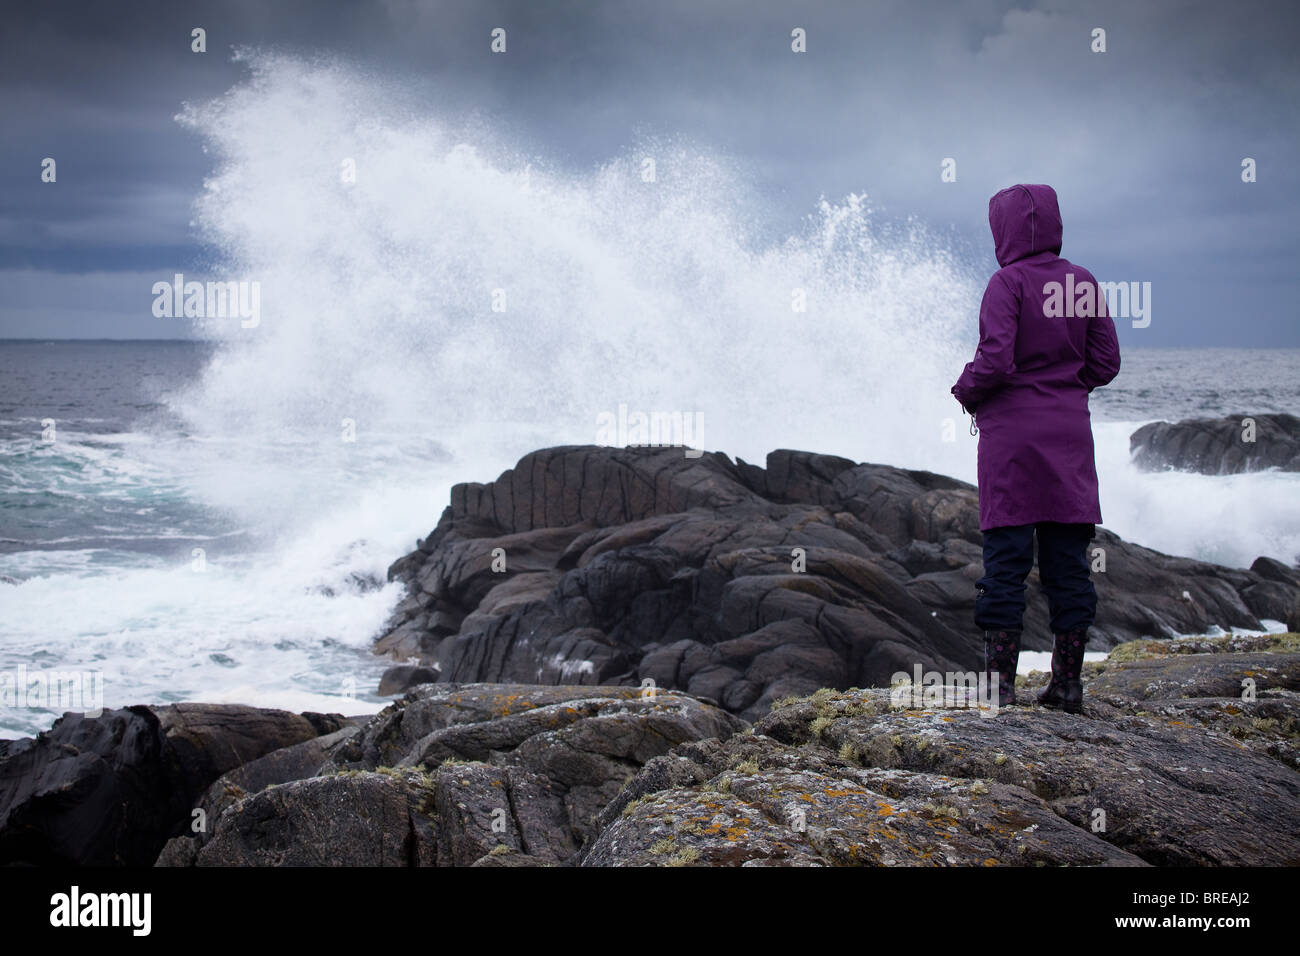 Big waves and windy conditions on the island Runde on the Atlantic west coast of Norway. Stock Photo